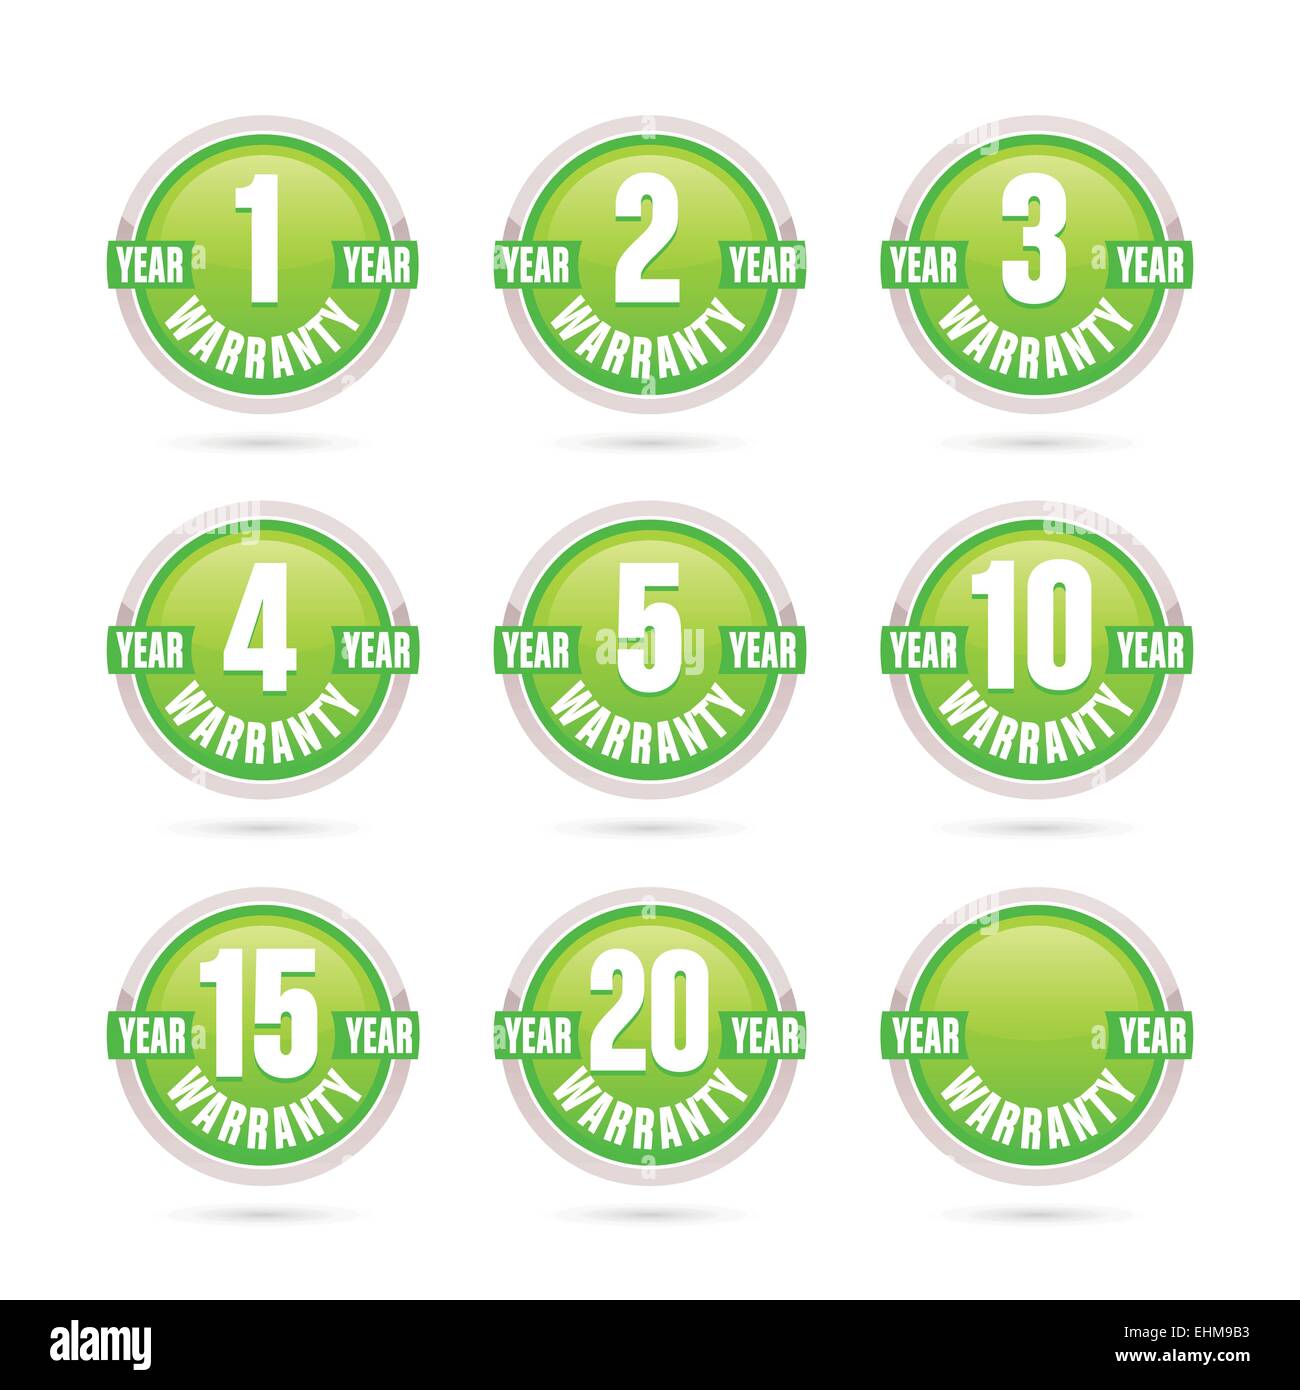 Green warranty round labels collection Stock Vector